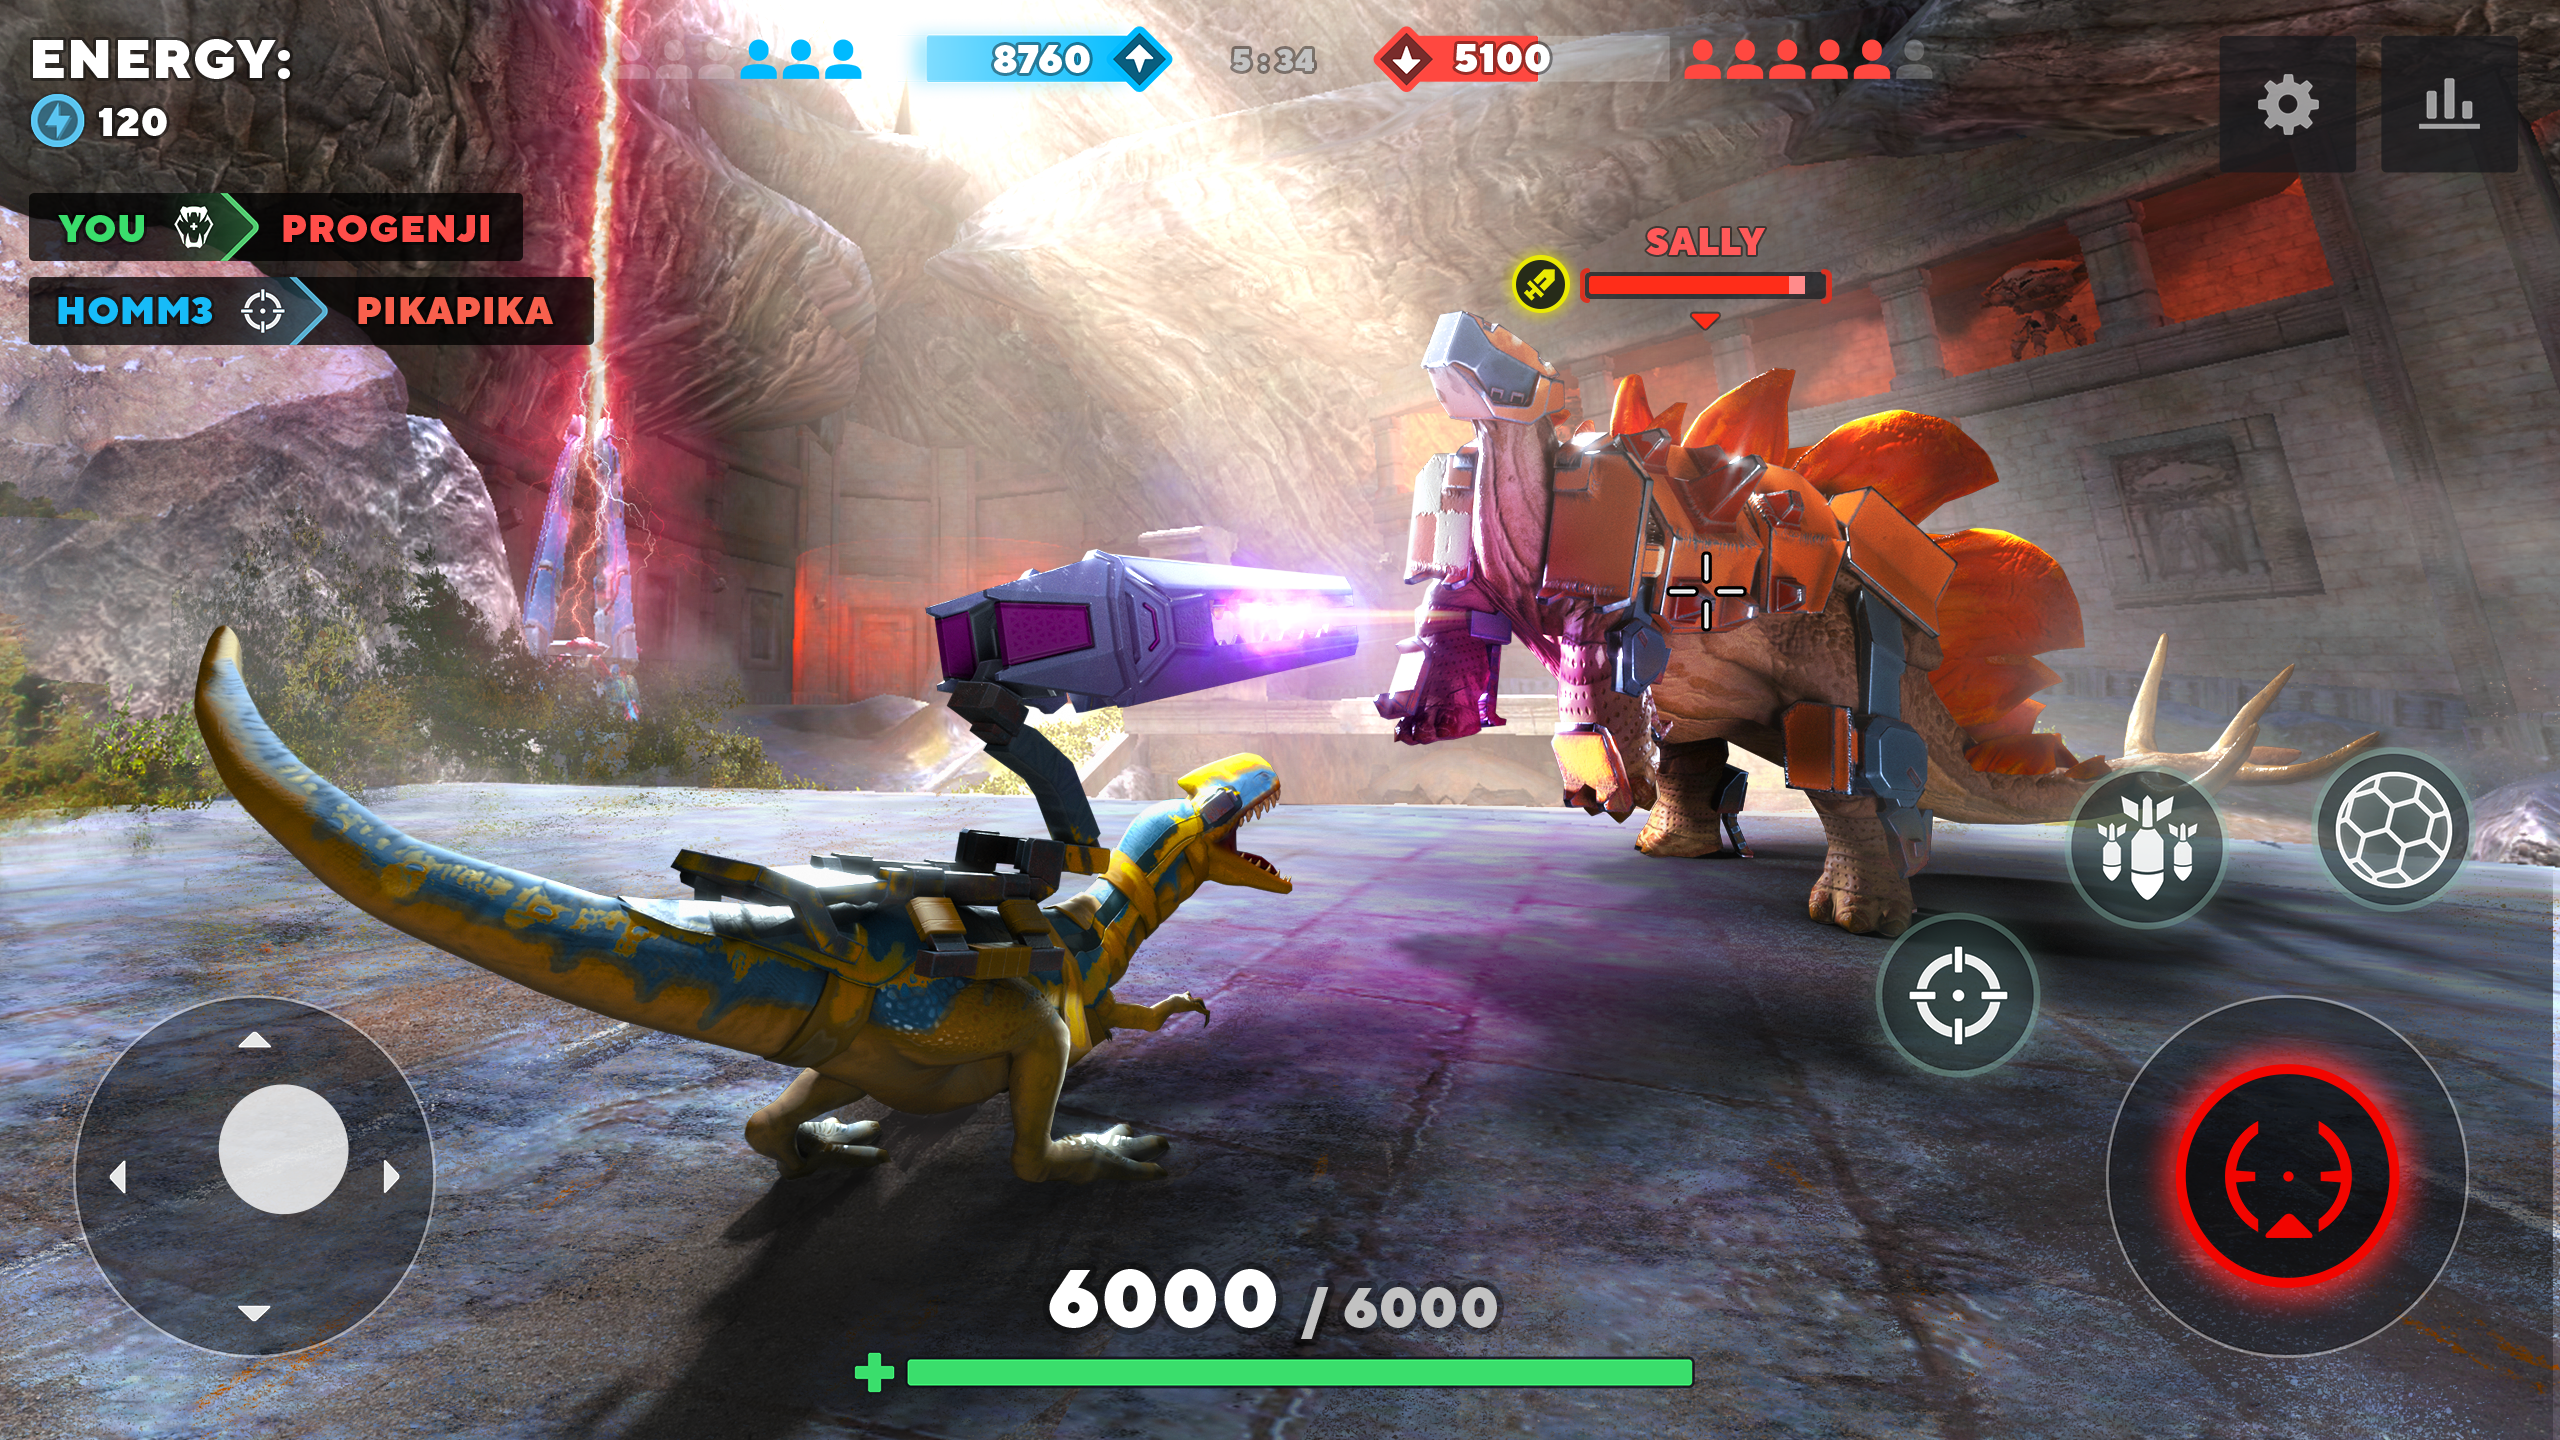 T-rex Dinosaur War - APK Download for Android